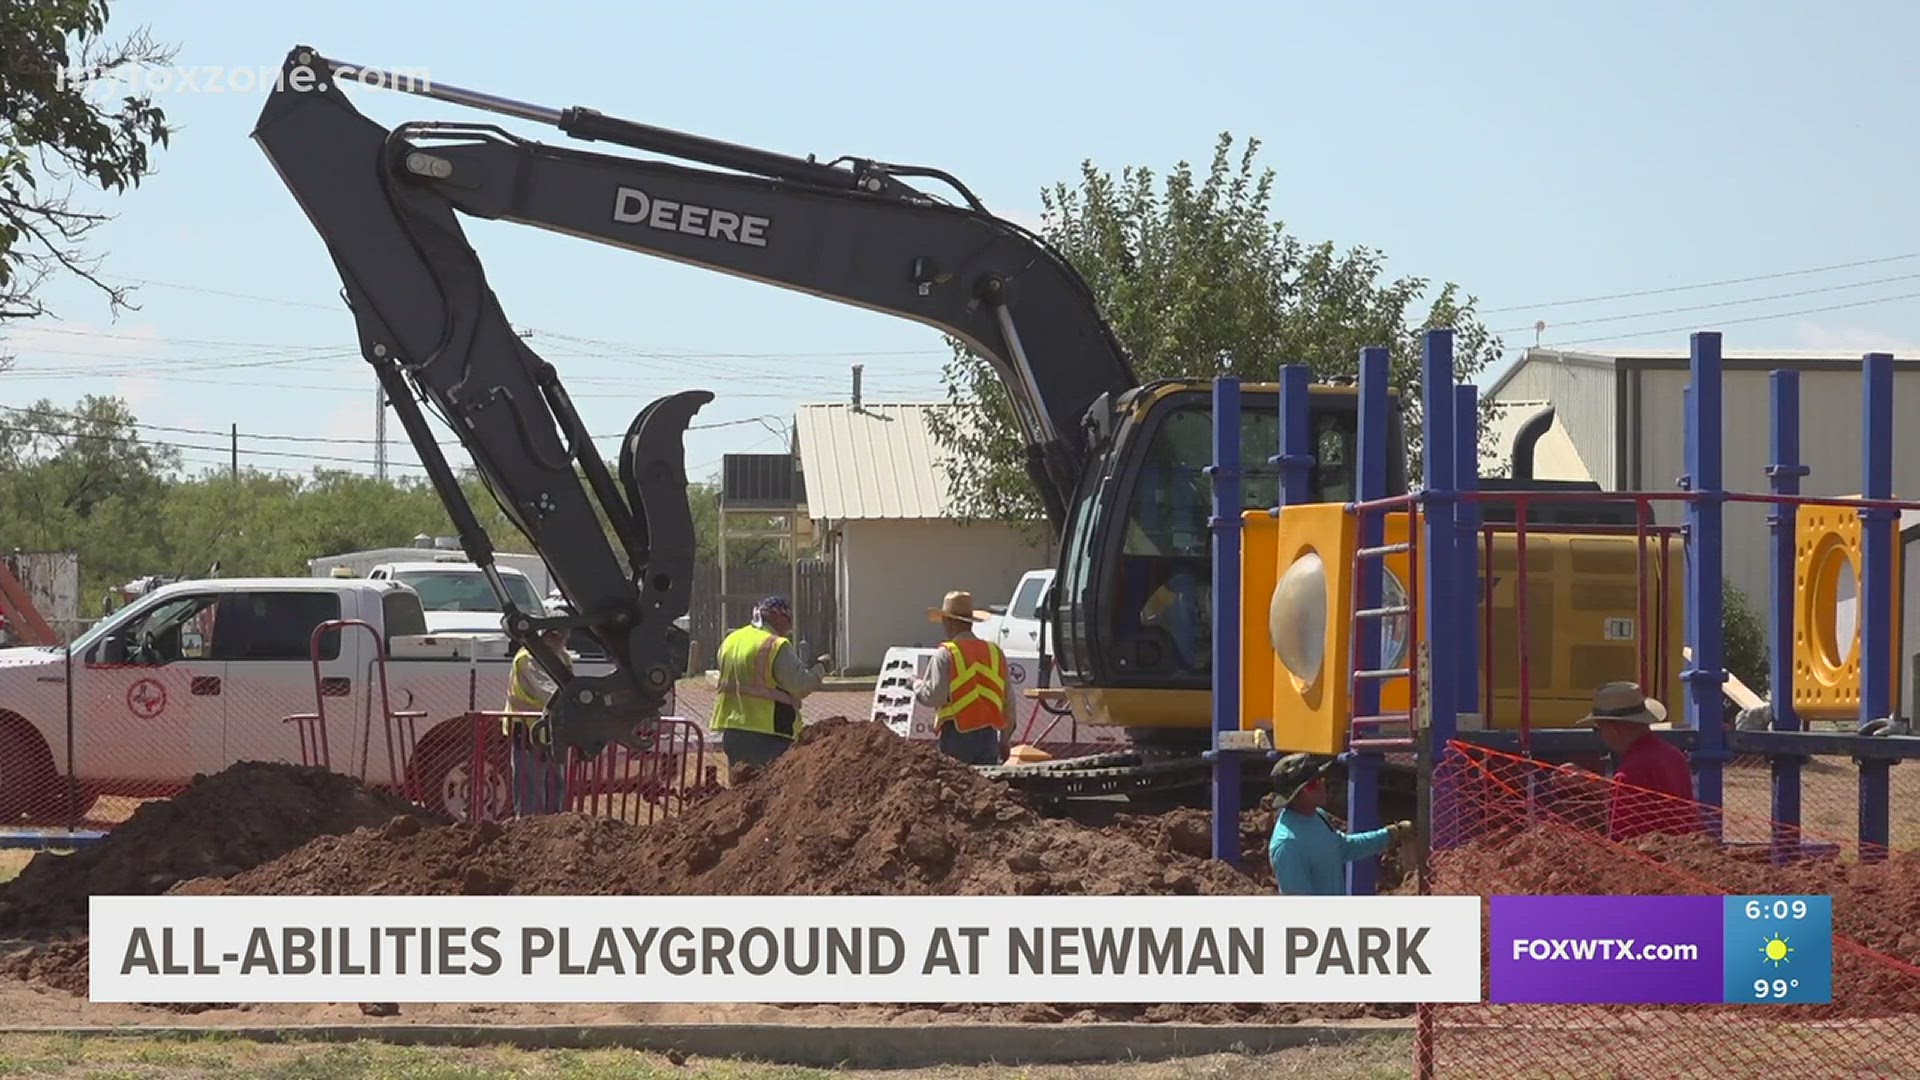 On Sept. 28, the City of Sweetwater will install a new all-abilities playground at Newman Park.